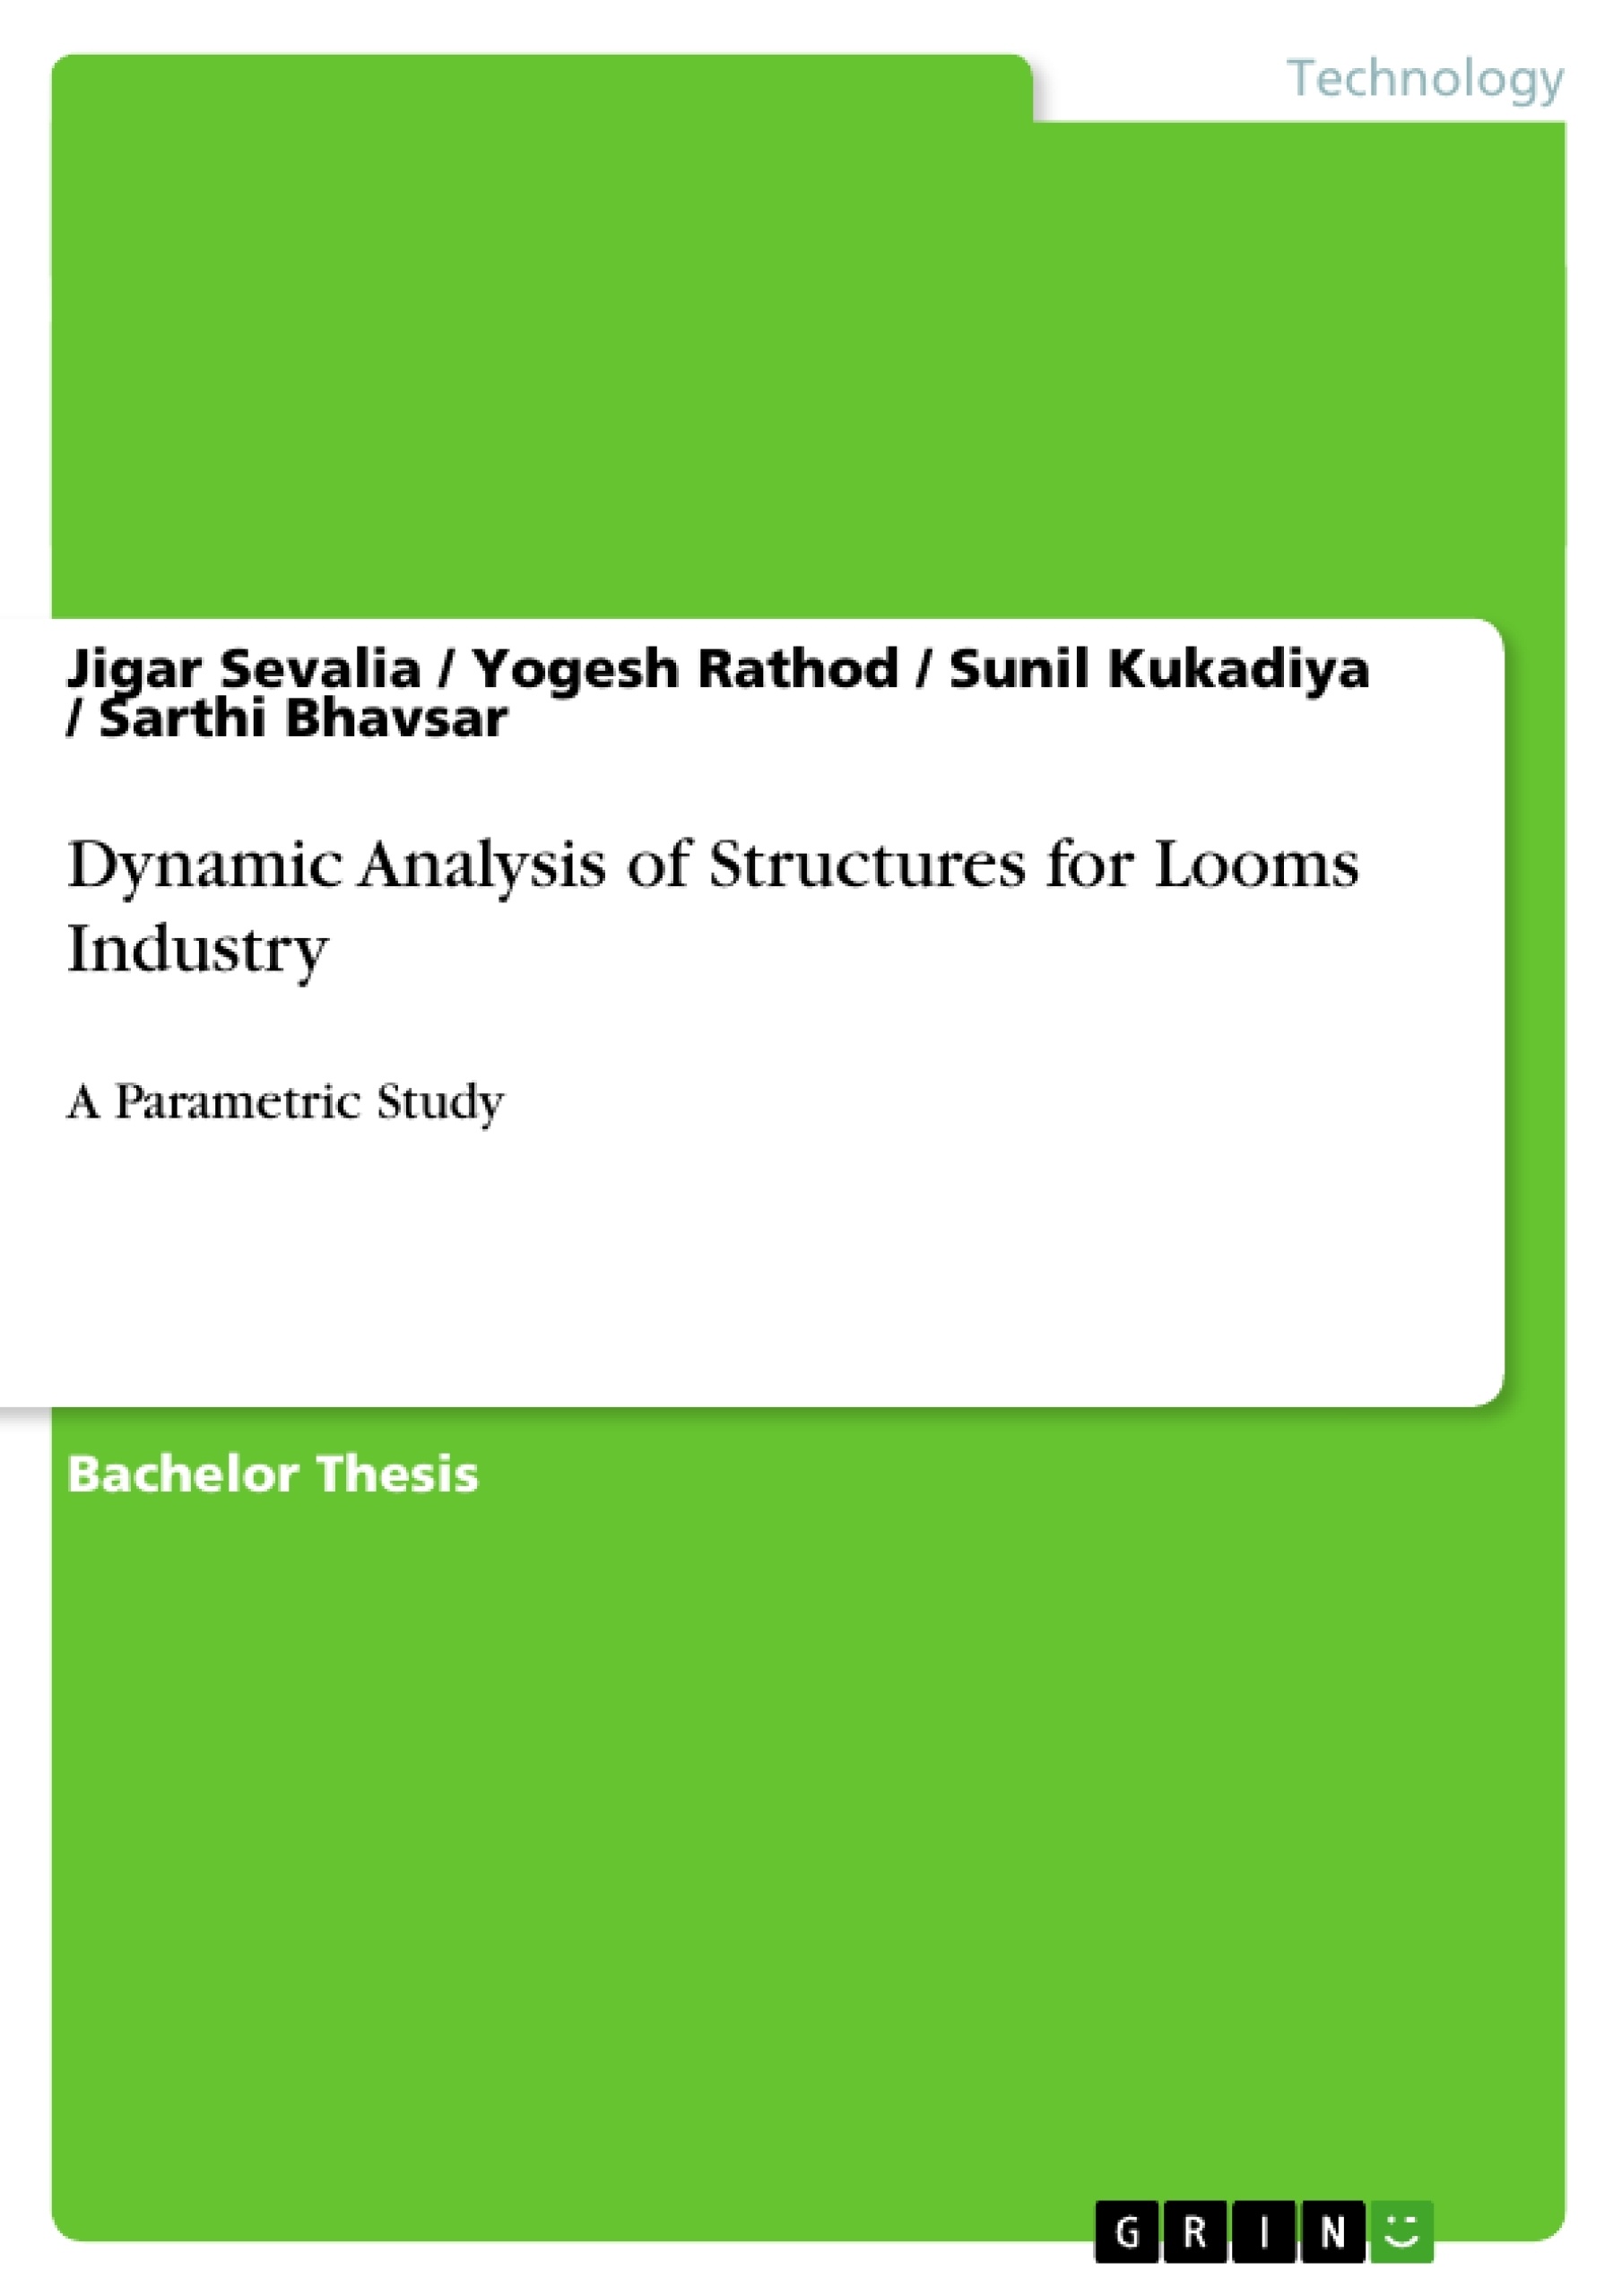 Título: Dynamic Analysis of Structures for Looms Industry